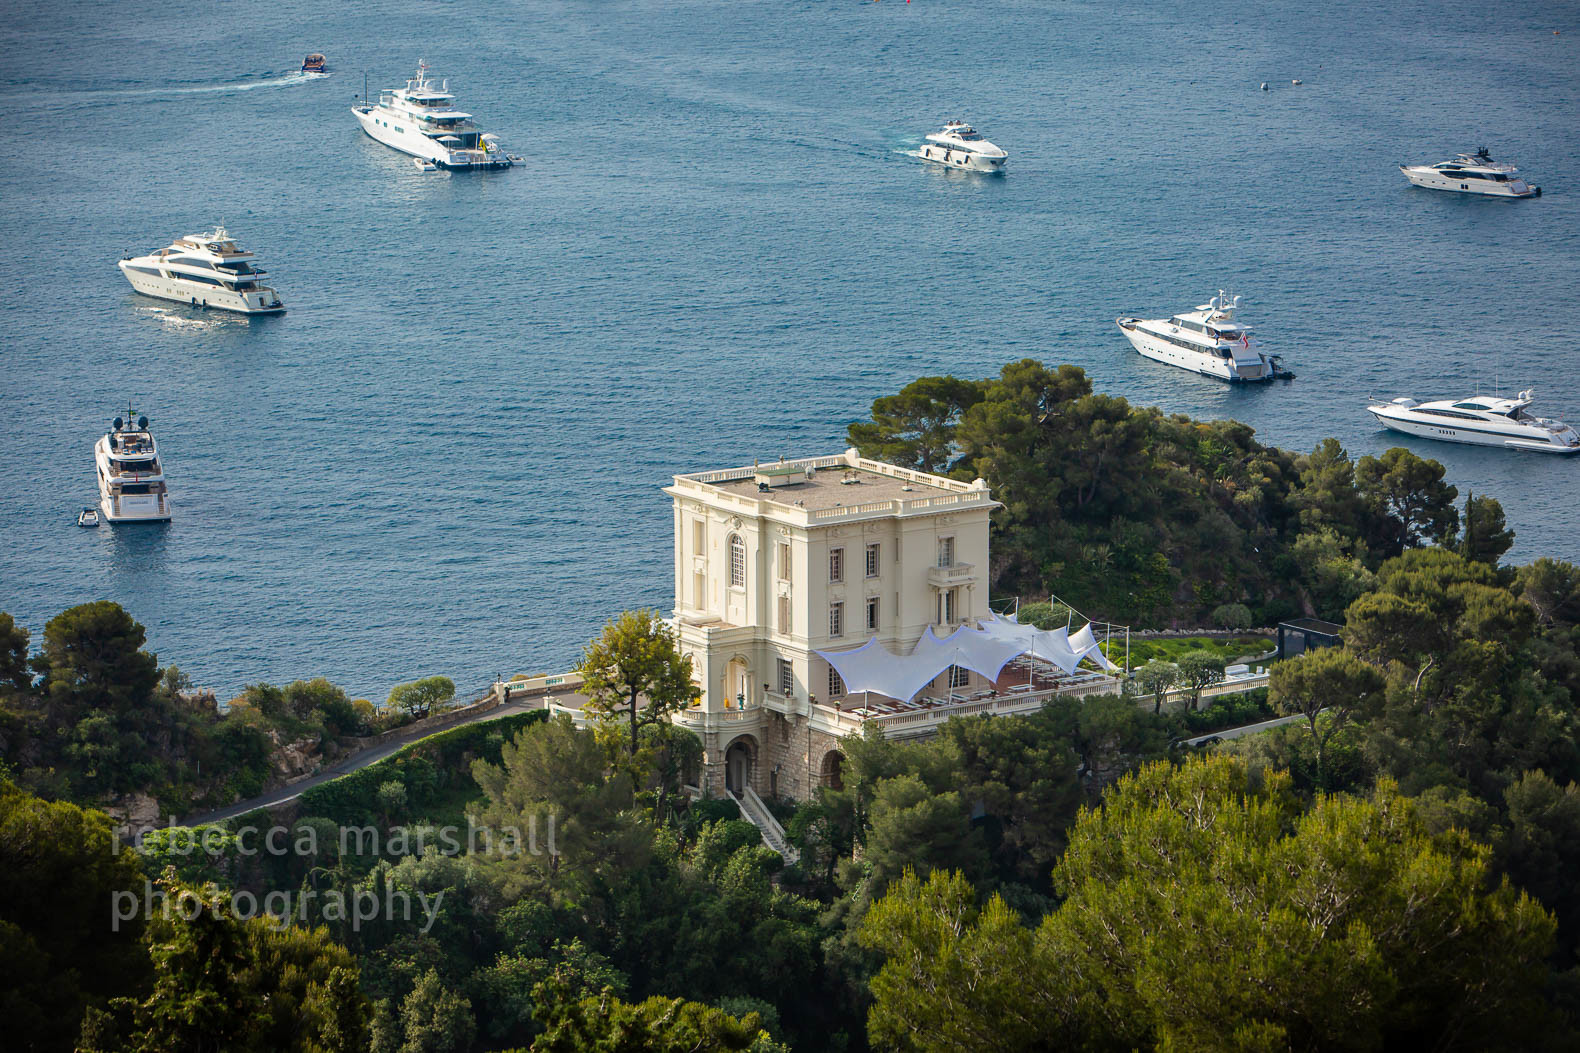 Photograph of Villa La Vigie from above, with yachts in the background